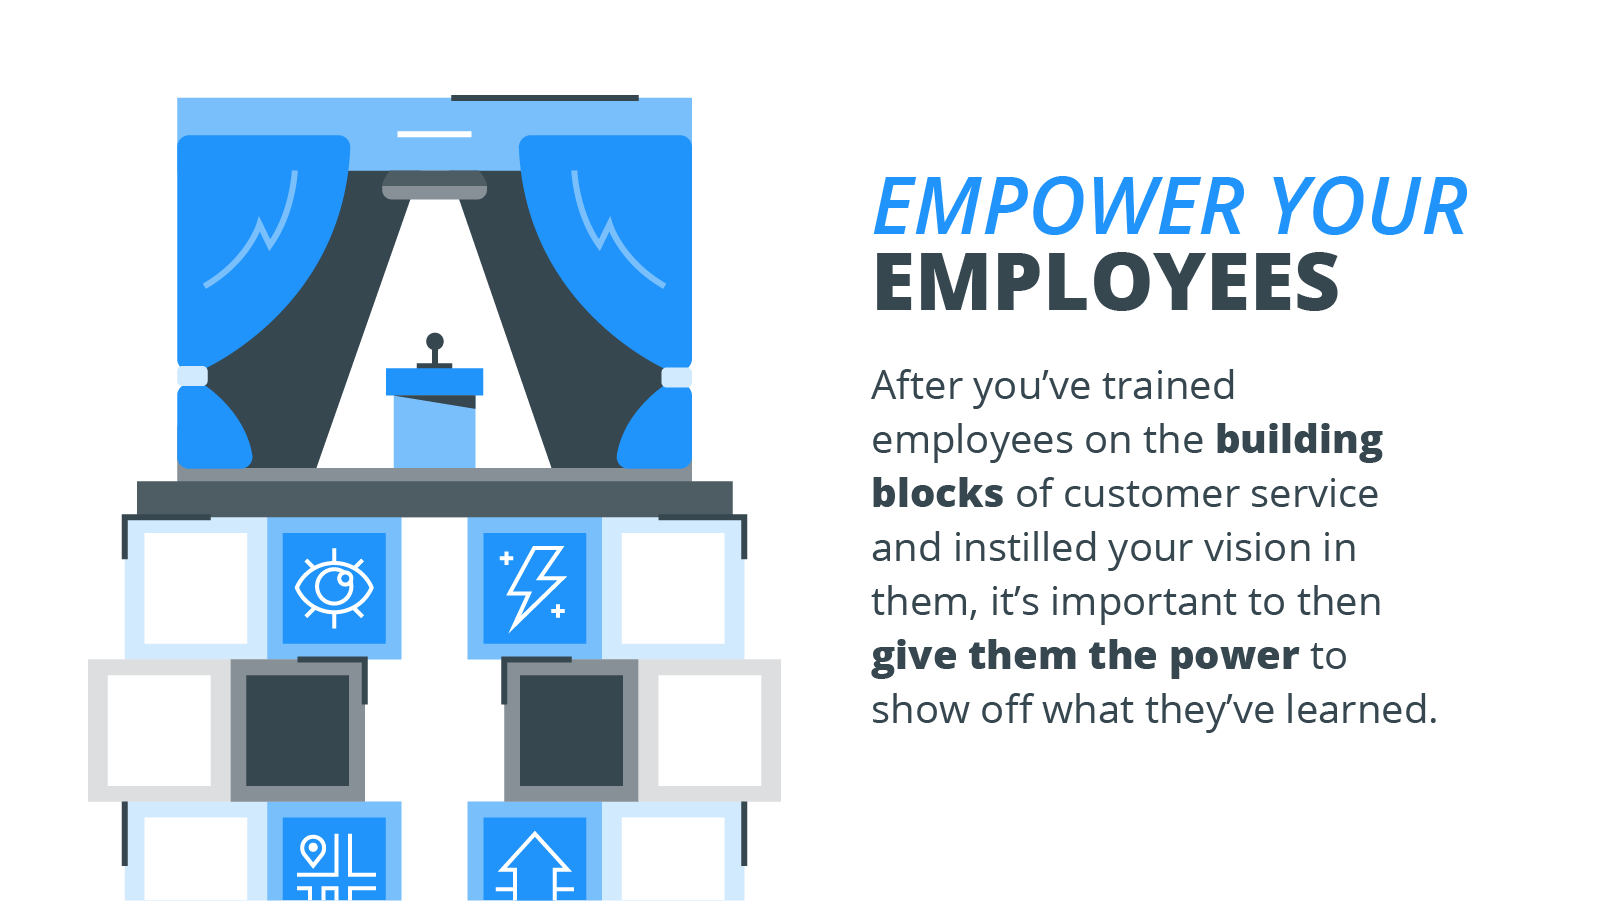 Empower your employees infographic